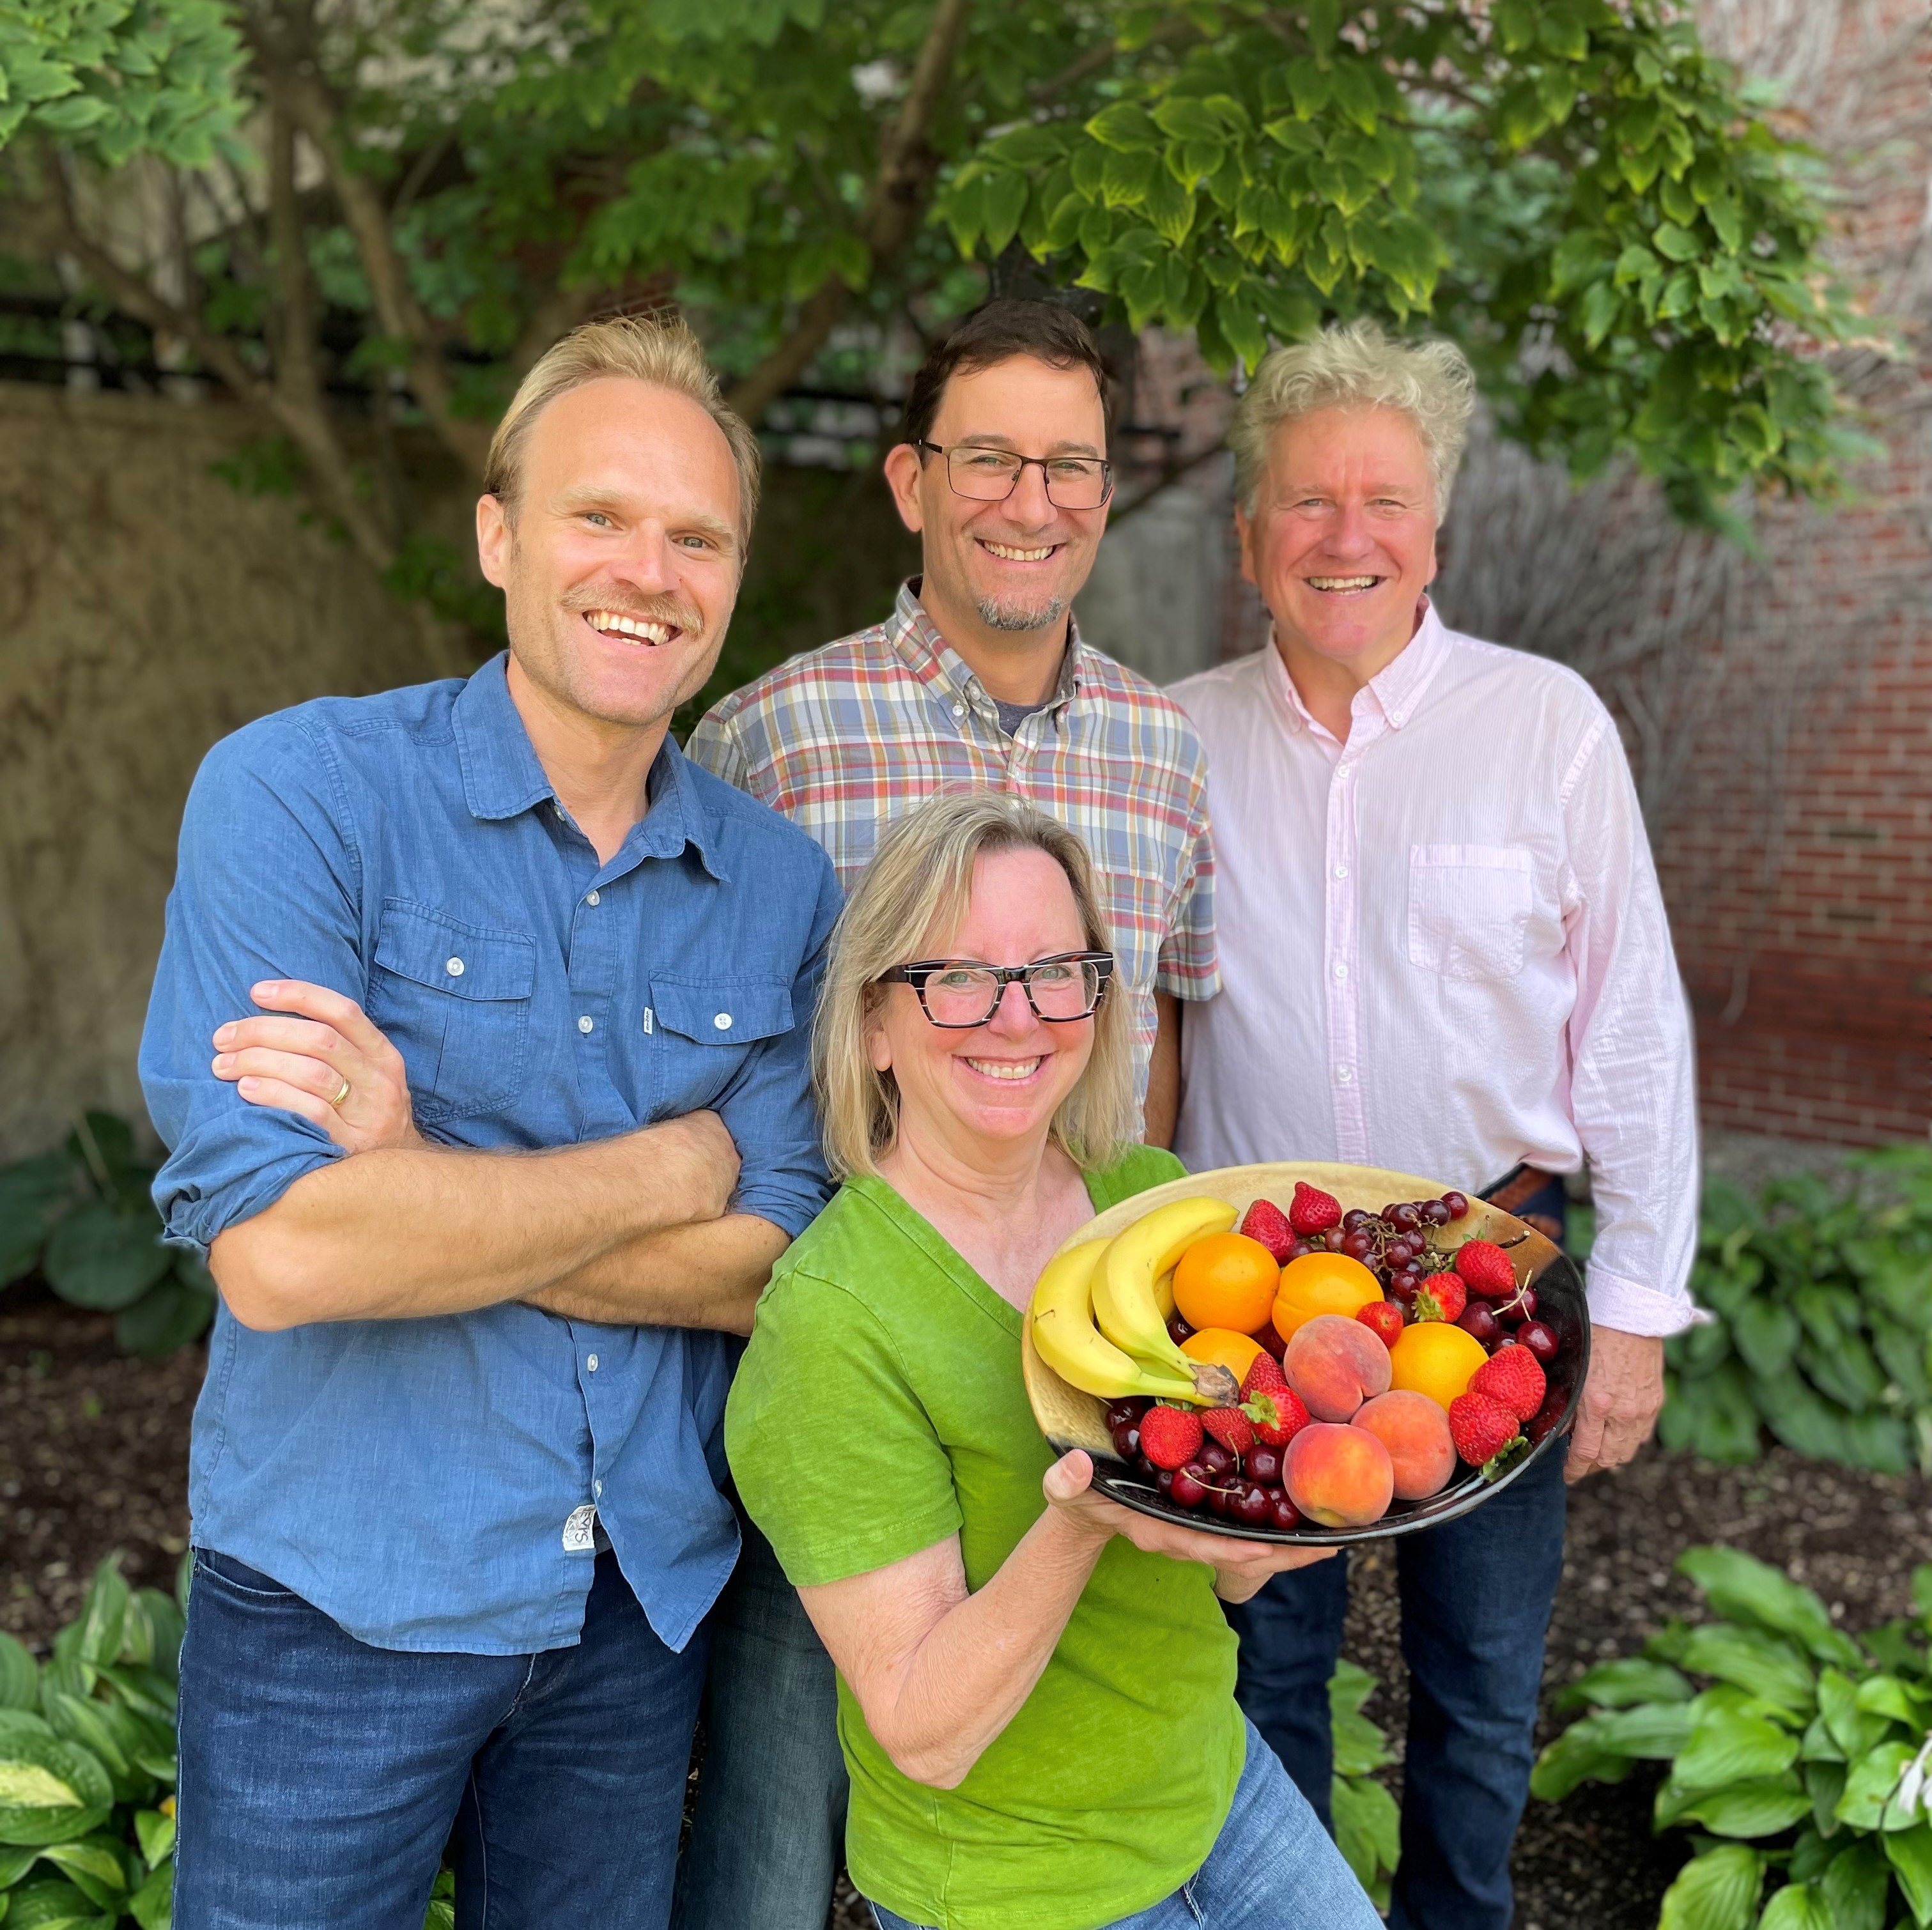 From left to right Tyler Dorholt, Jason Kohlbrenner, Tom McGarth, and Dr. Benette Whitmore, who is holding a plate of fruits.